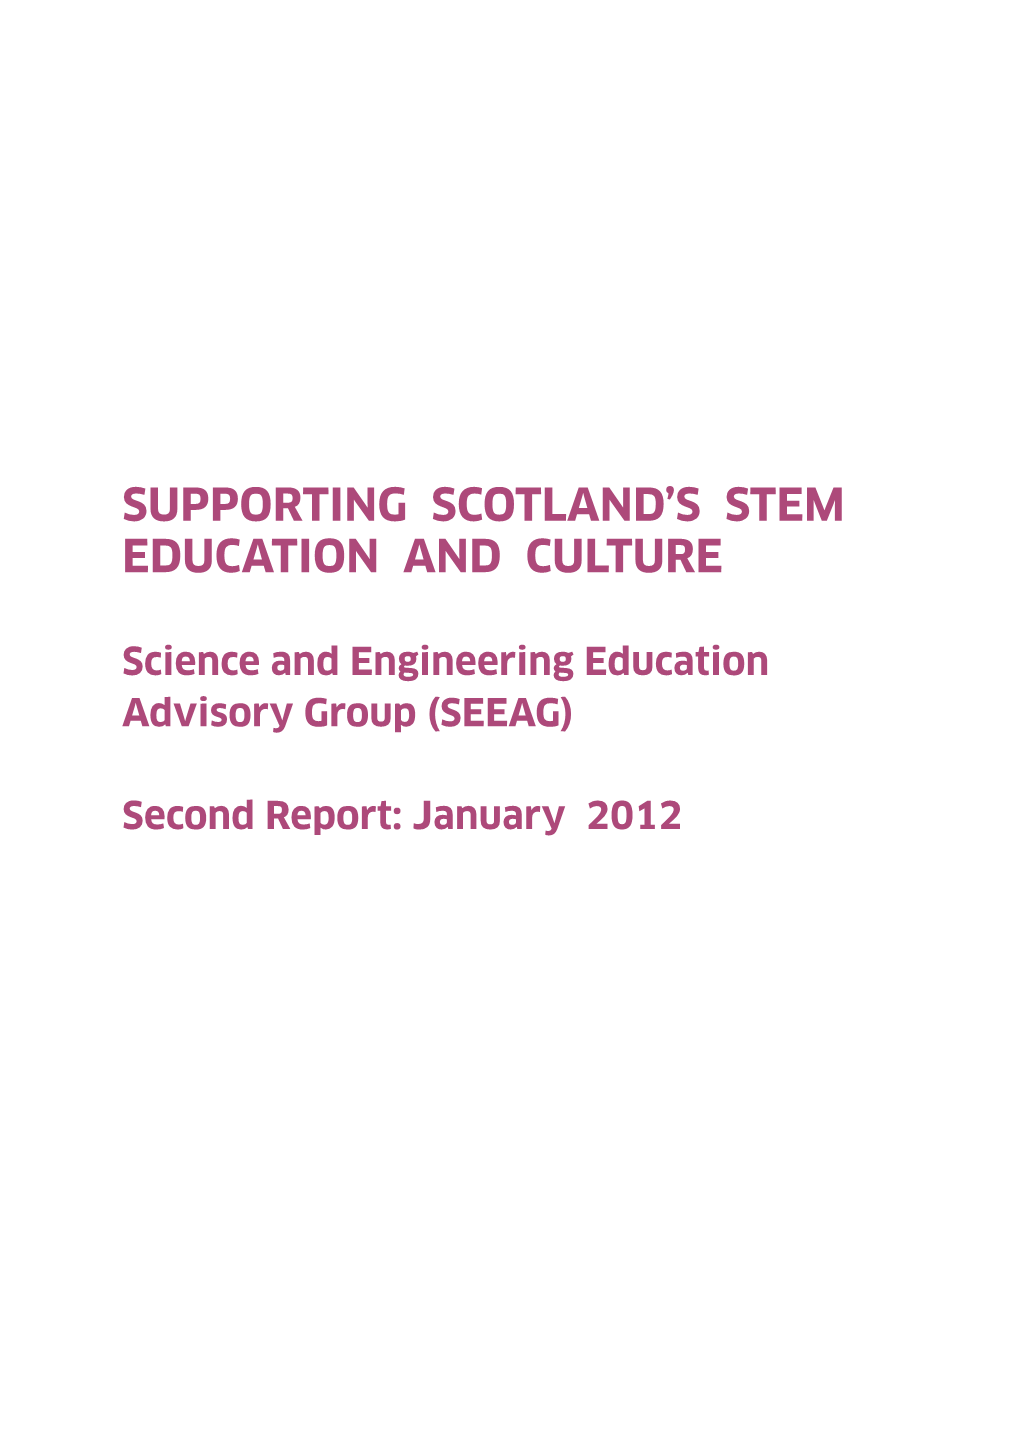 Supporting Scotland's Stem Education And